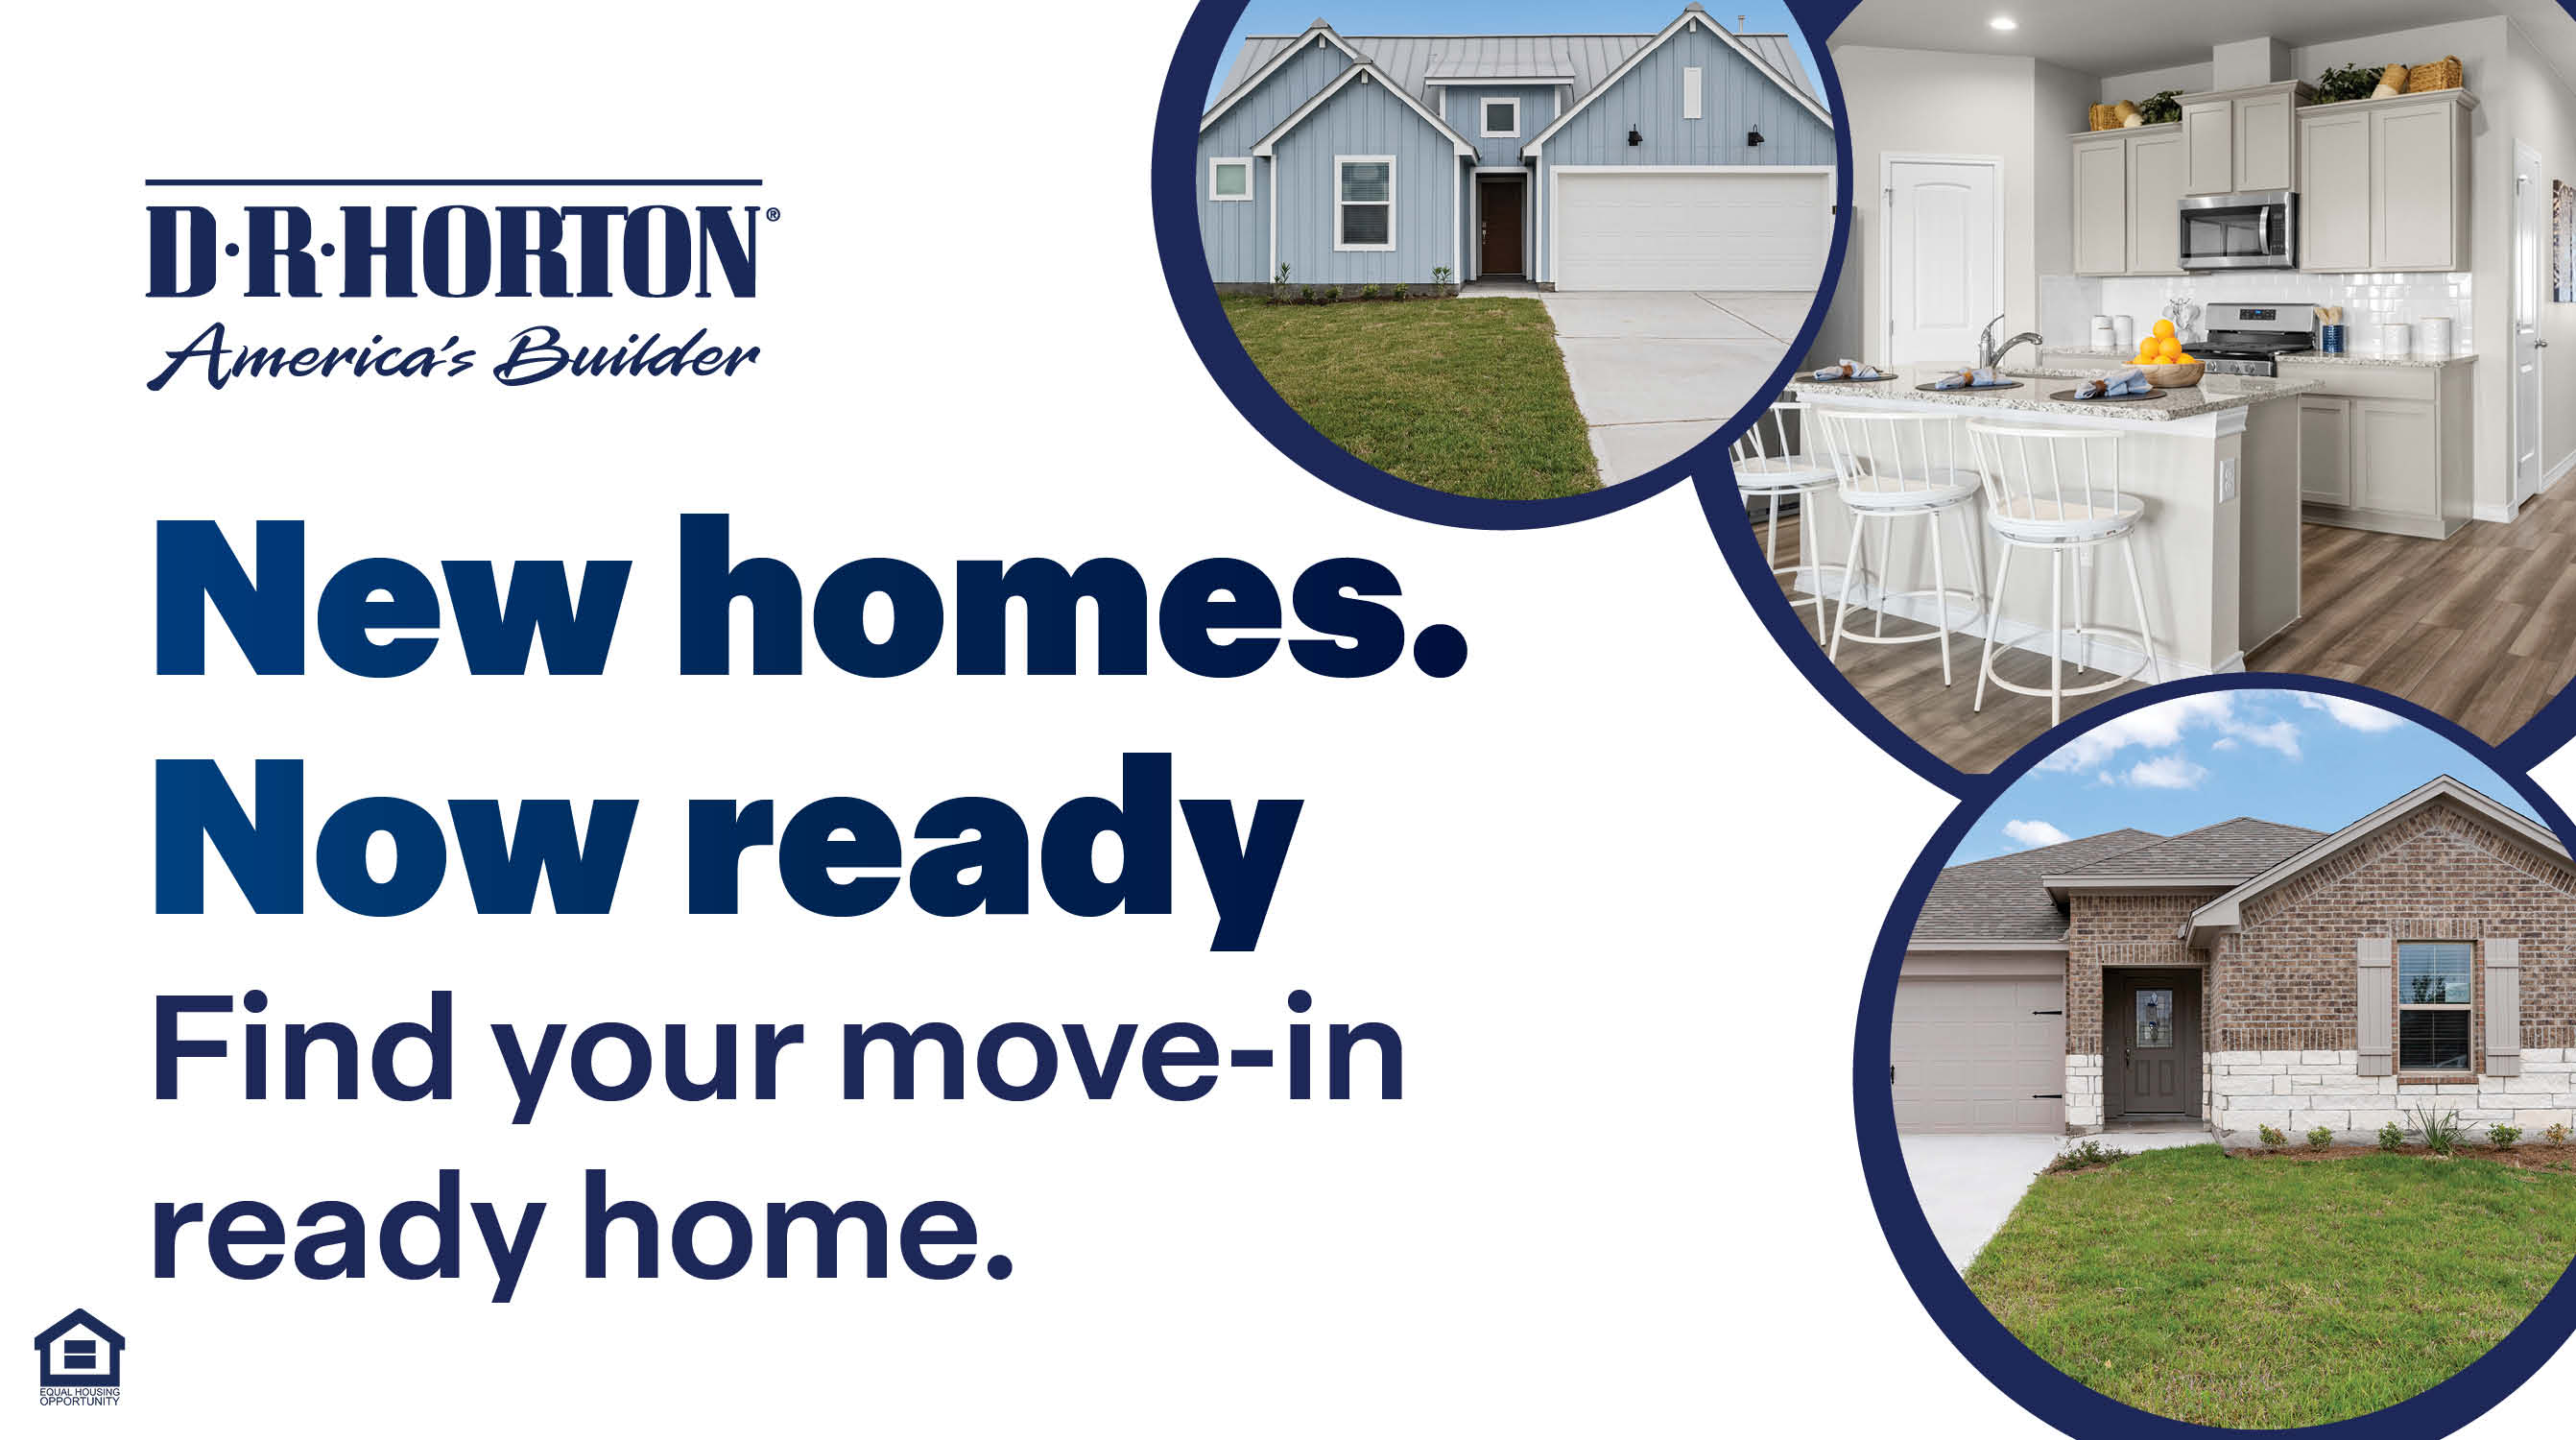 New homes. Now ready. Find your move-in ready home. 